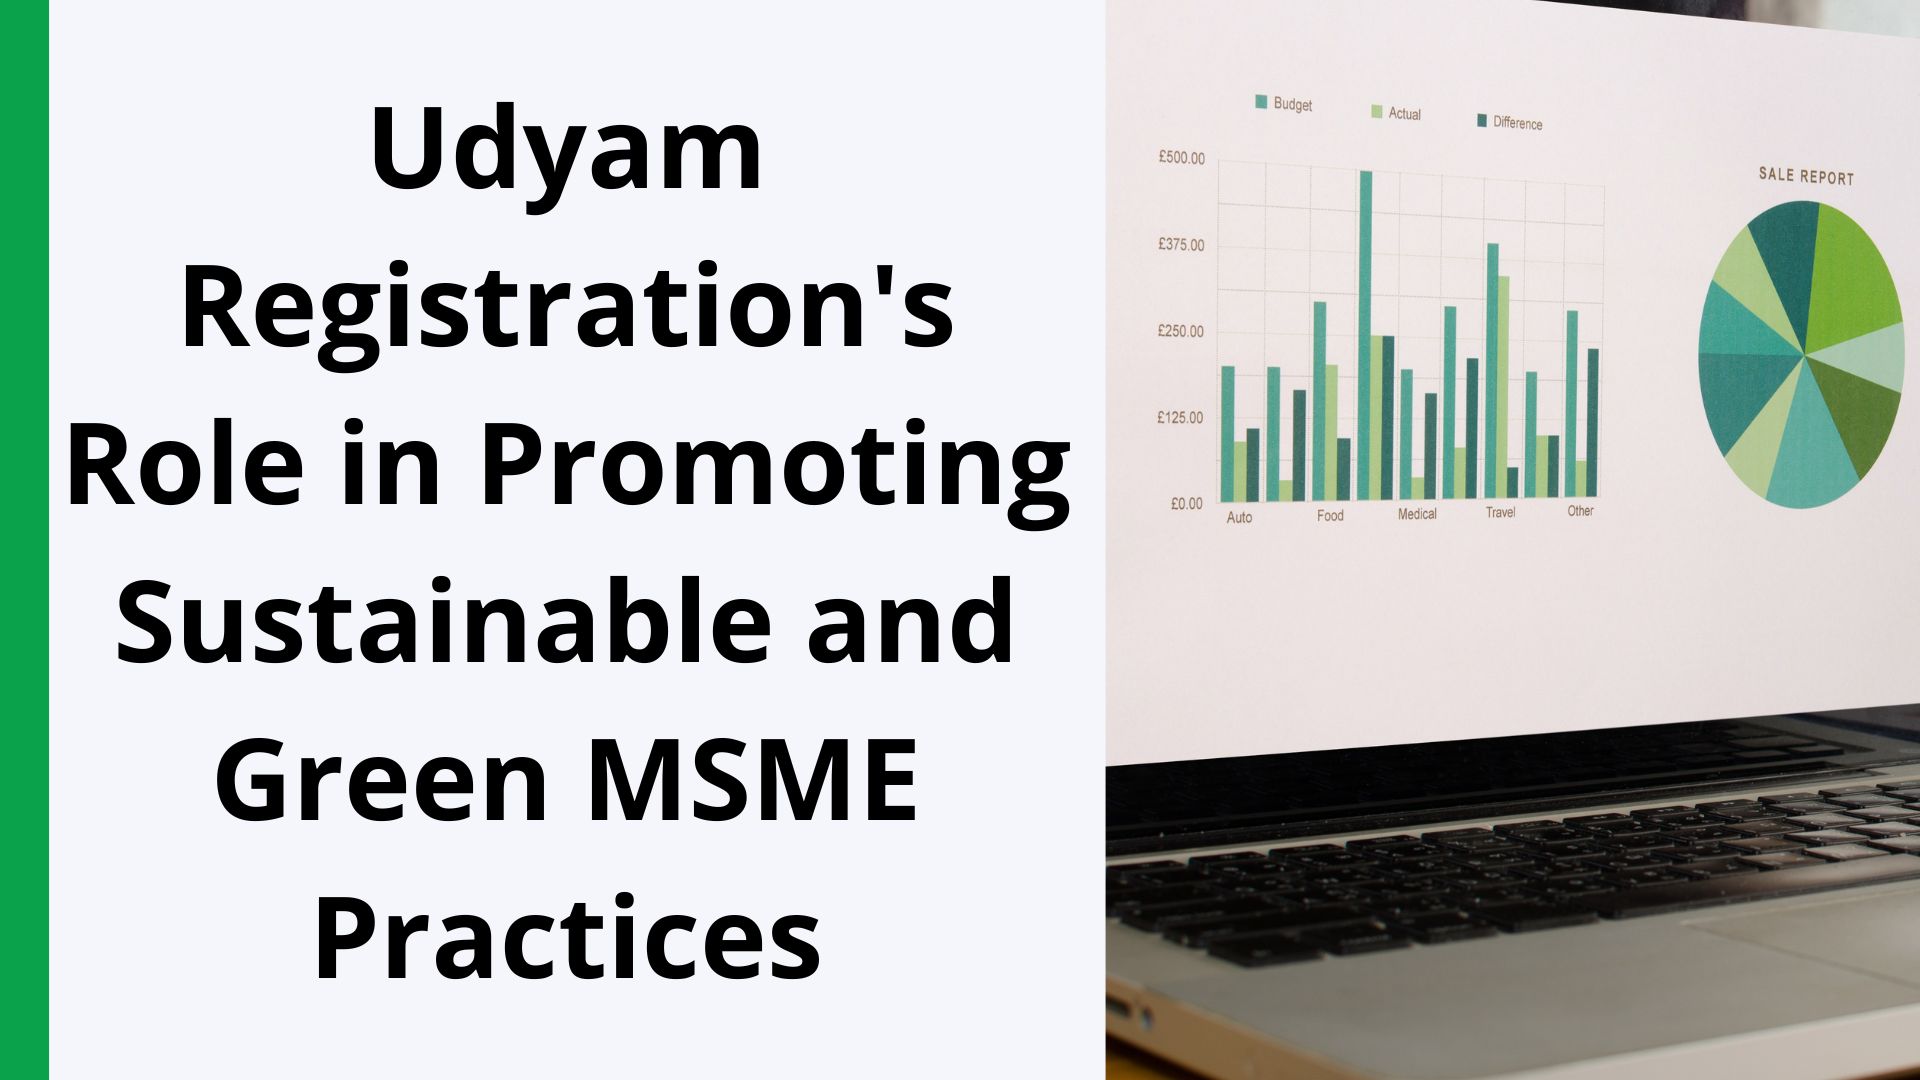 Udyam Registration’s Role in Promoting Sustainable and Green MSME Practices